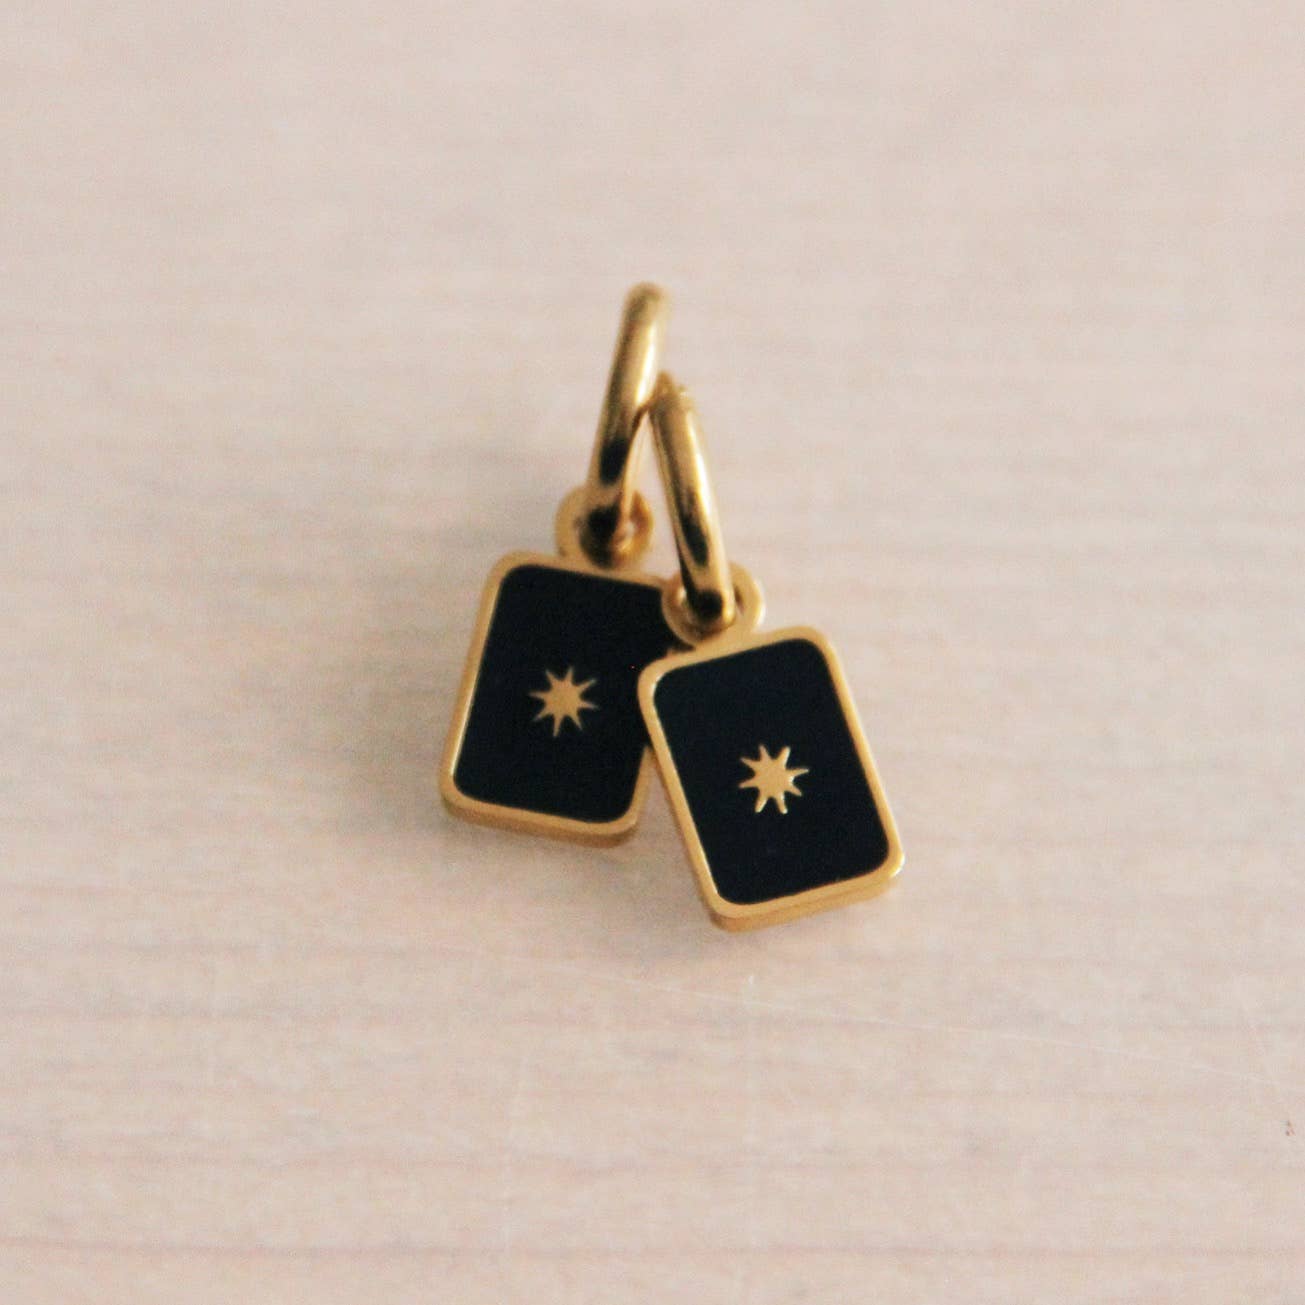 Bazou earrings with black square star tag